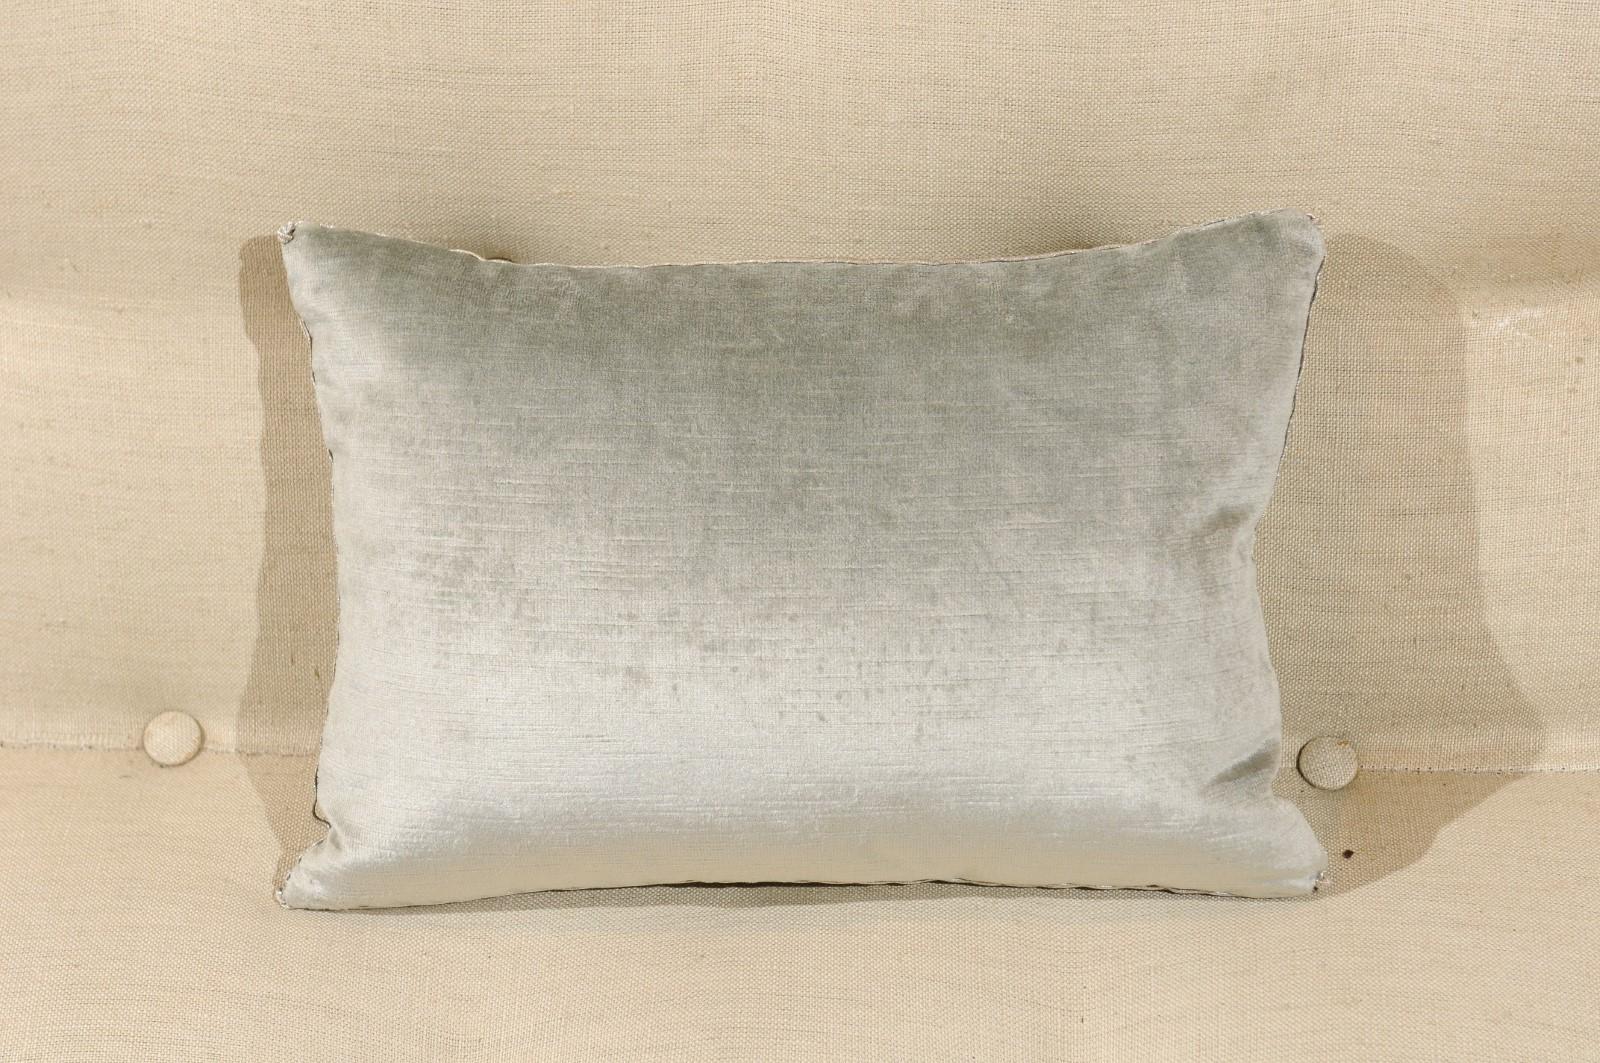 Pale French Blue Velvet Pillow with Silver Embroidered Appliqué Foliage Décor 1